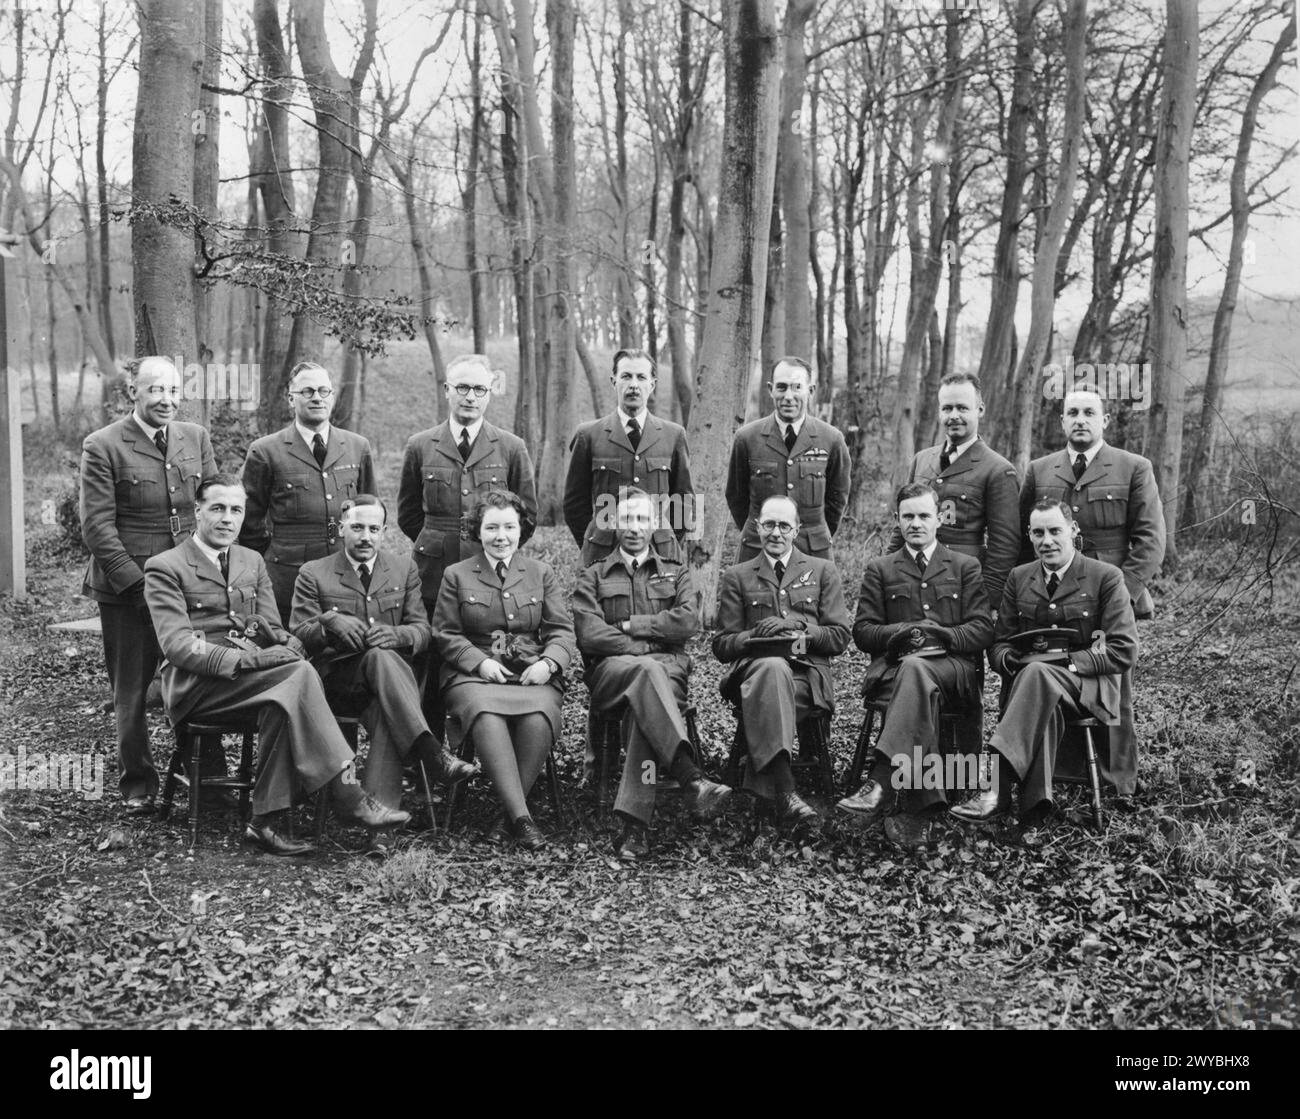 PHOTOGRAPHY DURING THE SECOND WORLD WAR - A group of Bomber Command Photographic Officers, led by Group Captain F C Sturgiss OBE.Standing left to right:Squadron Leader E King, Squadron Leader J E Brown, Squadron Leader J Jameson, Flight Lieutenant J S Cabot, Squadron Leader L Mant, Squadron Leader A S Archer (from Canada), Pilot Officer R G Cleave.Sitting left to right:Squadron Leader H W Lees, Squadron Leader L Hardy, Station Officer T Hamilton-Jones, Group Captain F C Sturgiss, Squadron Leader F L Wills, Flight Lieutenant J J McCloskey, Squadron Leader J E Archibald. , Royal Air Force Stock Photo